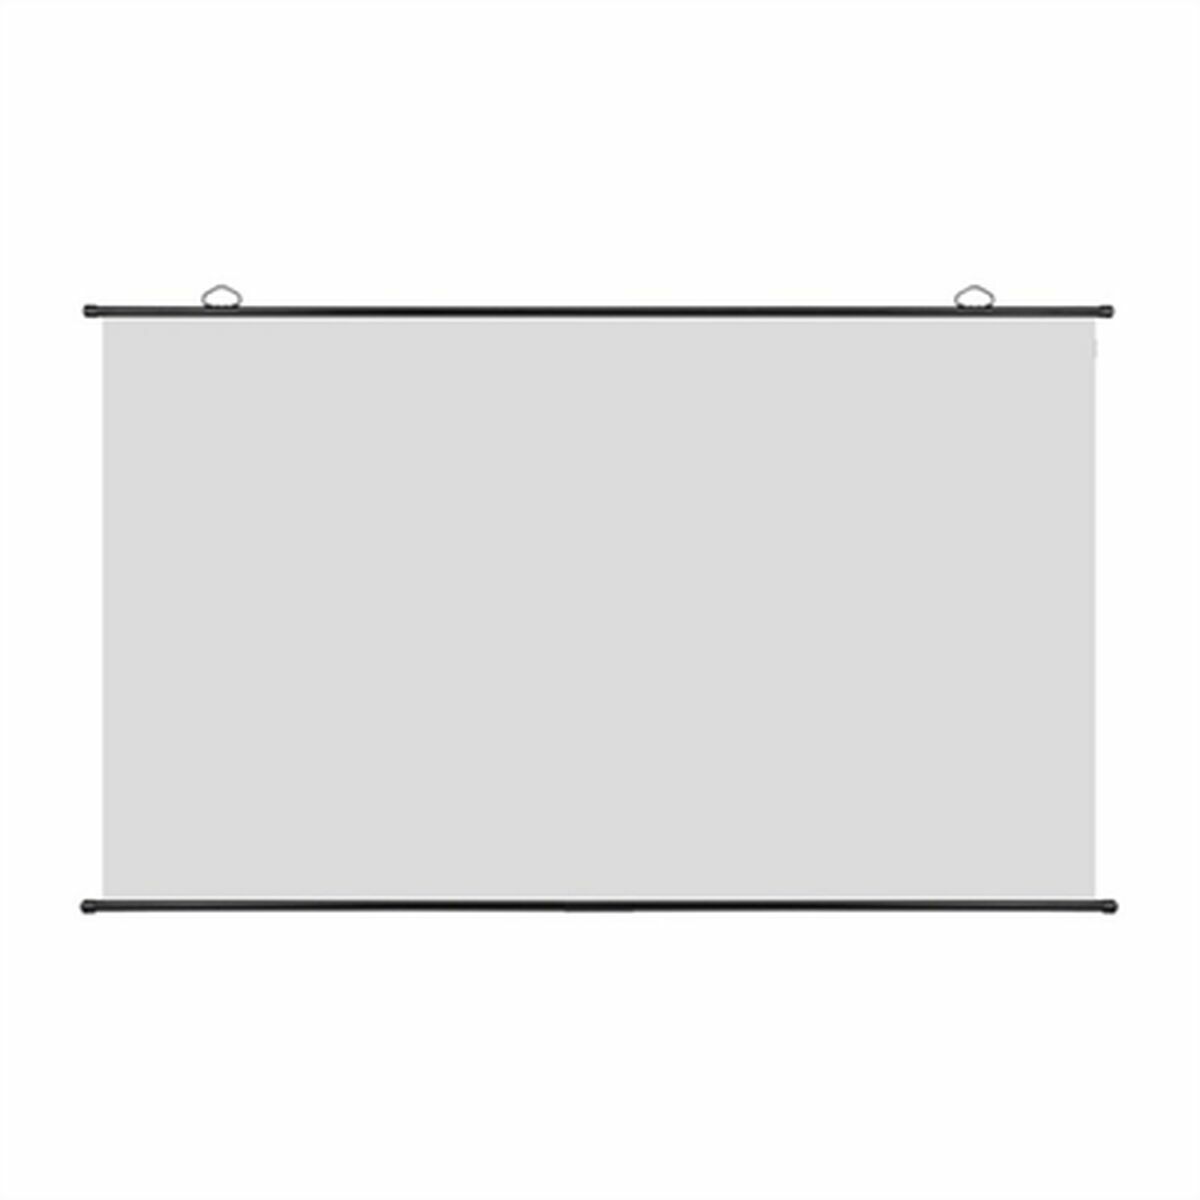 Projection Screen iggual IGG318102 100", iggual, Electronics, TV, Video and home cinema, projection-screen-iggual-igg318102-101, Brand_iggual, category-reference-2609, category-reference-2642, category-reference-2852, category-reference-t-18805, category-reference-t-19653, category-reference-t-19921, category-reference-t-21391, category-reference-t-25697, cinema and television, computers / peripherals, Condition_NEW, entertainment, office, Price_50 - 100, RiotNook